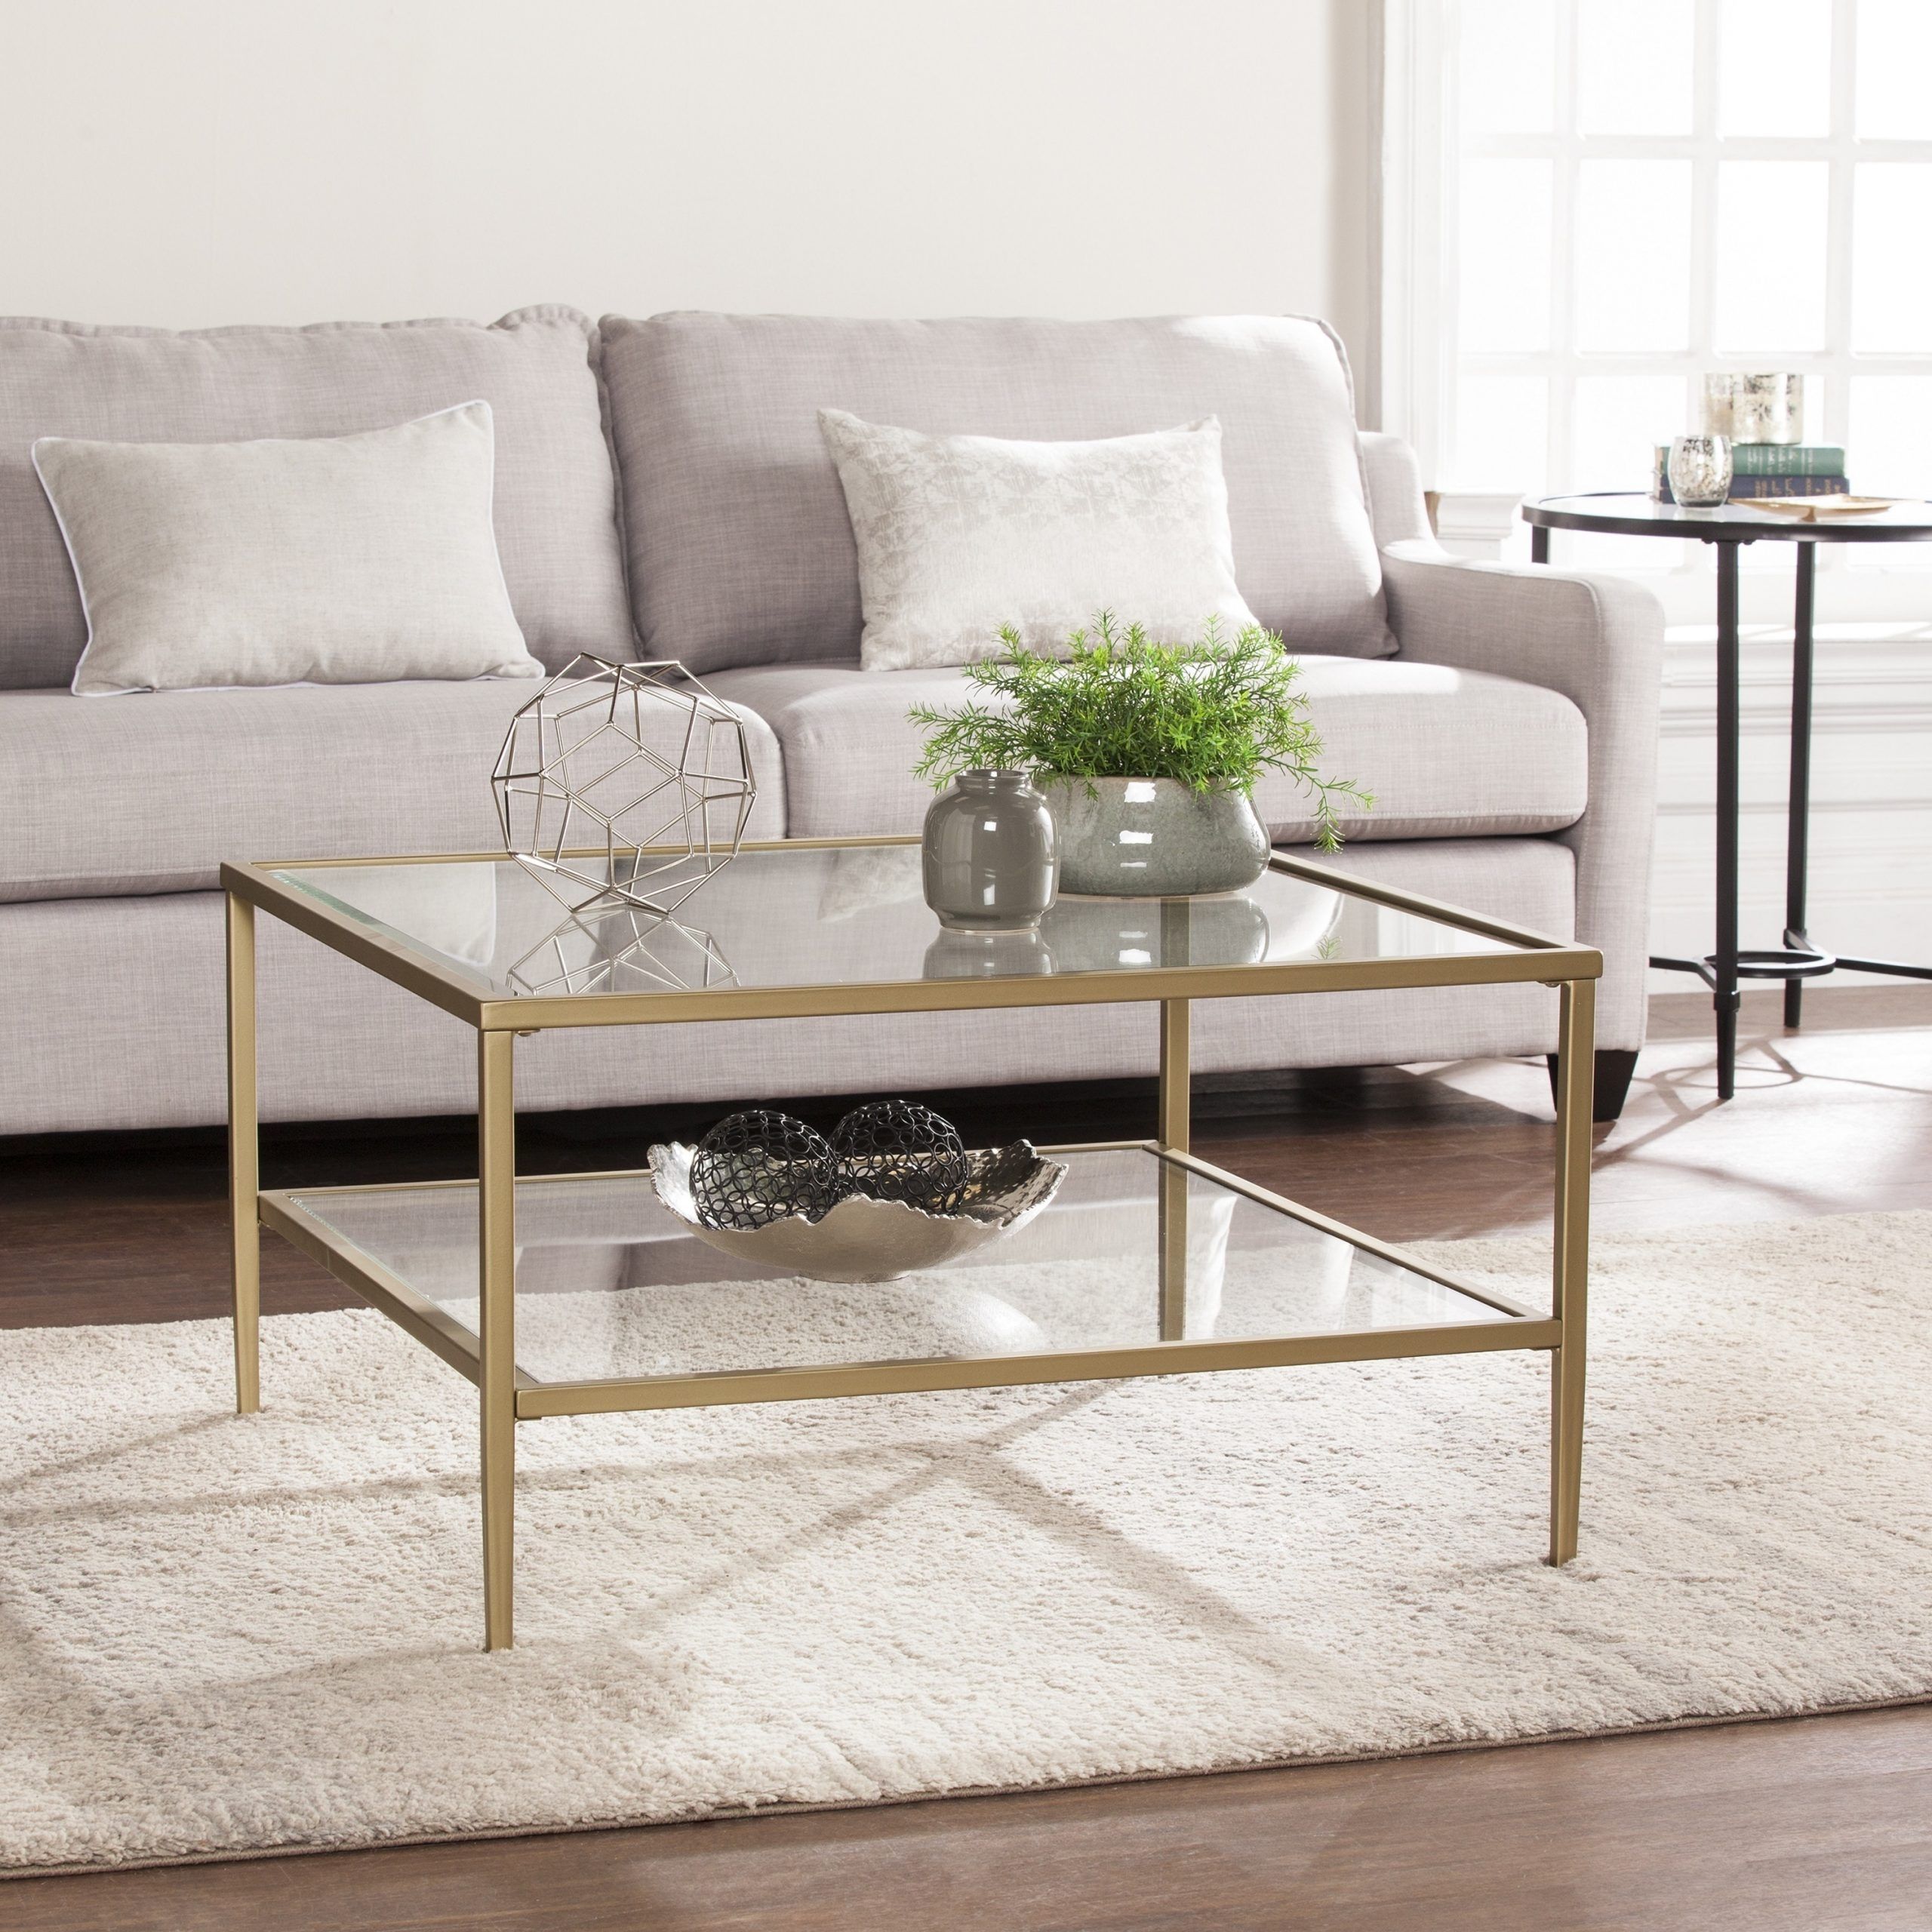 Shop Harper Blvd Kolder Square Metal/glass Open Shelf For 2019 Glass And Gold Coffee Tables (Gallery 10 of 20)